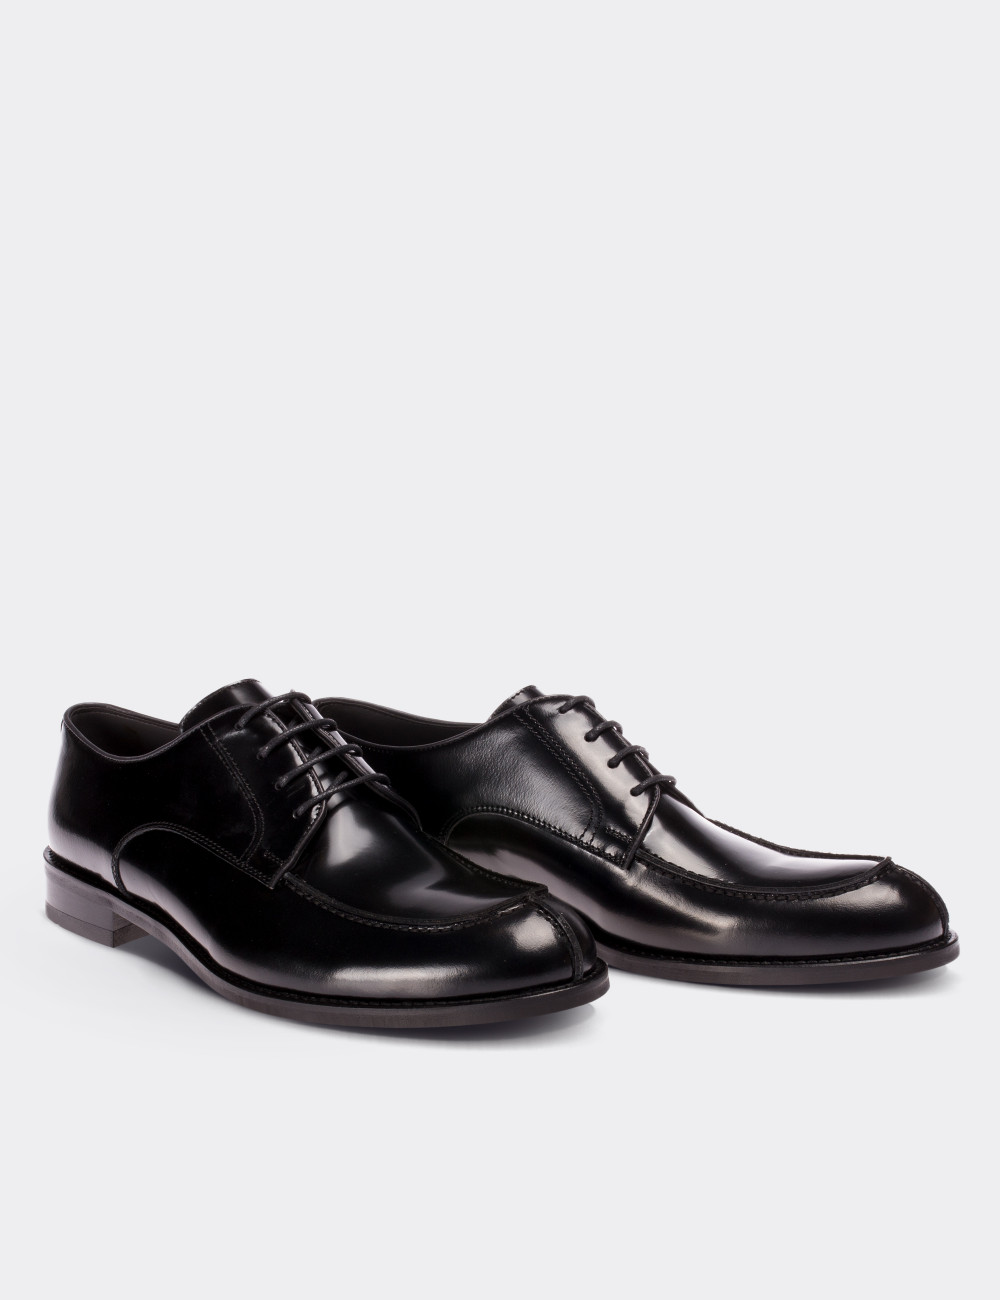 Black  Leather Classic Shoes - 01695MSYHM01